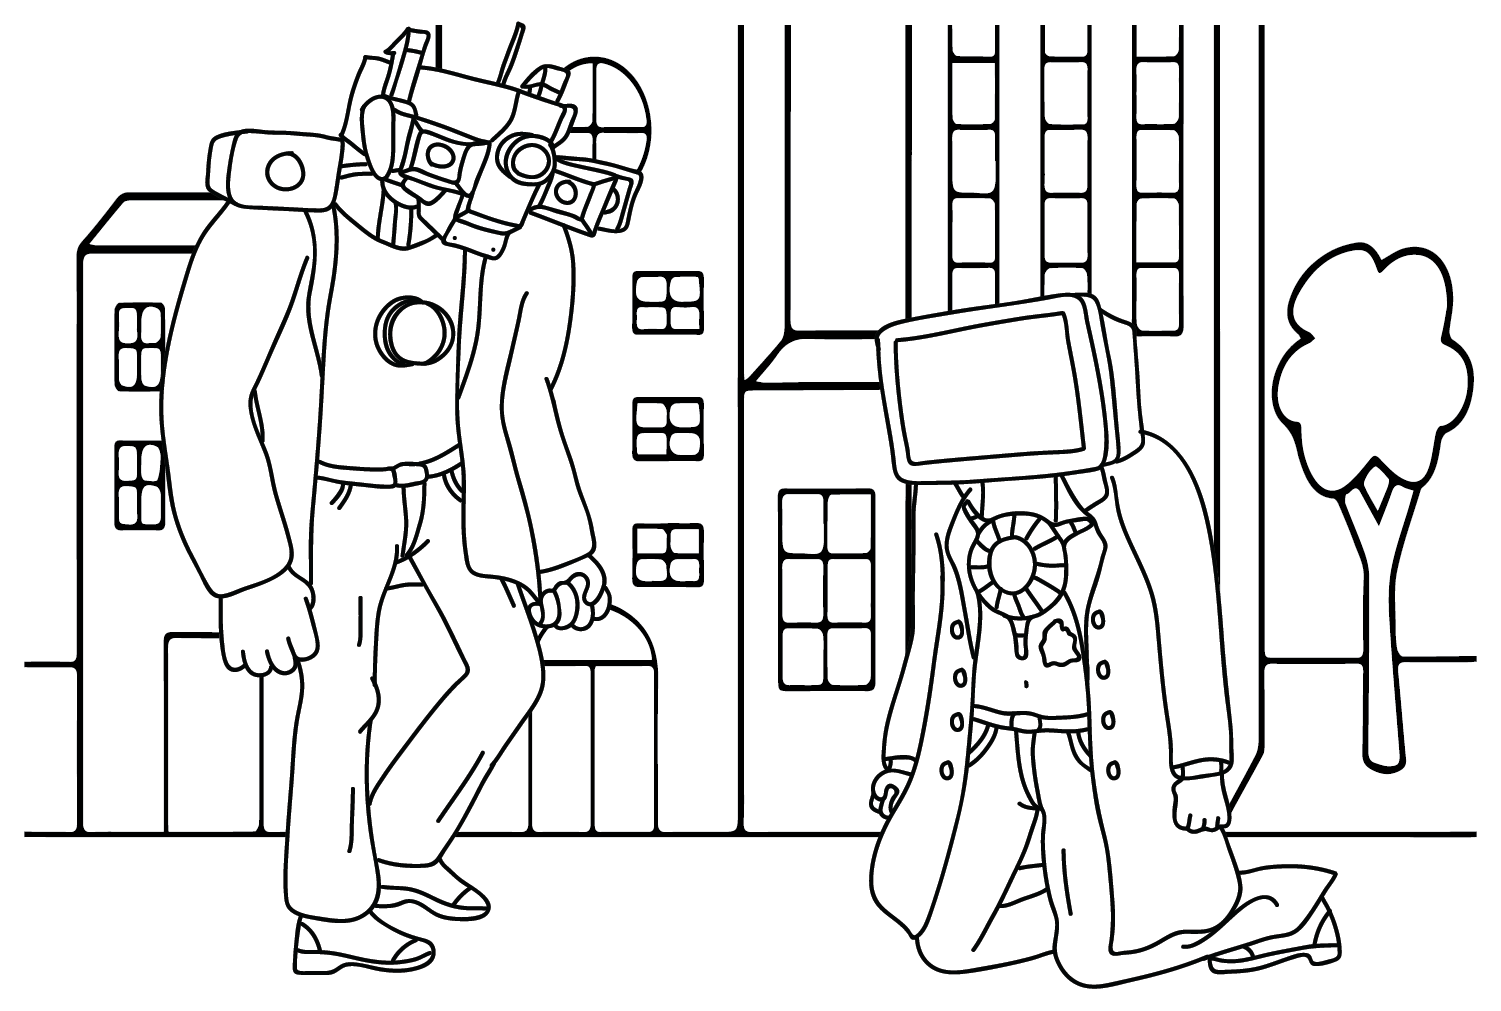 TV Man and Titan Cameraman Coloring Page - Free Printable Coloring Pages